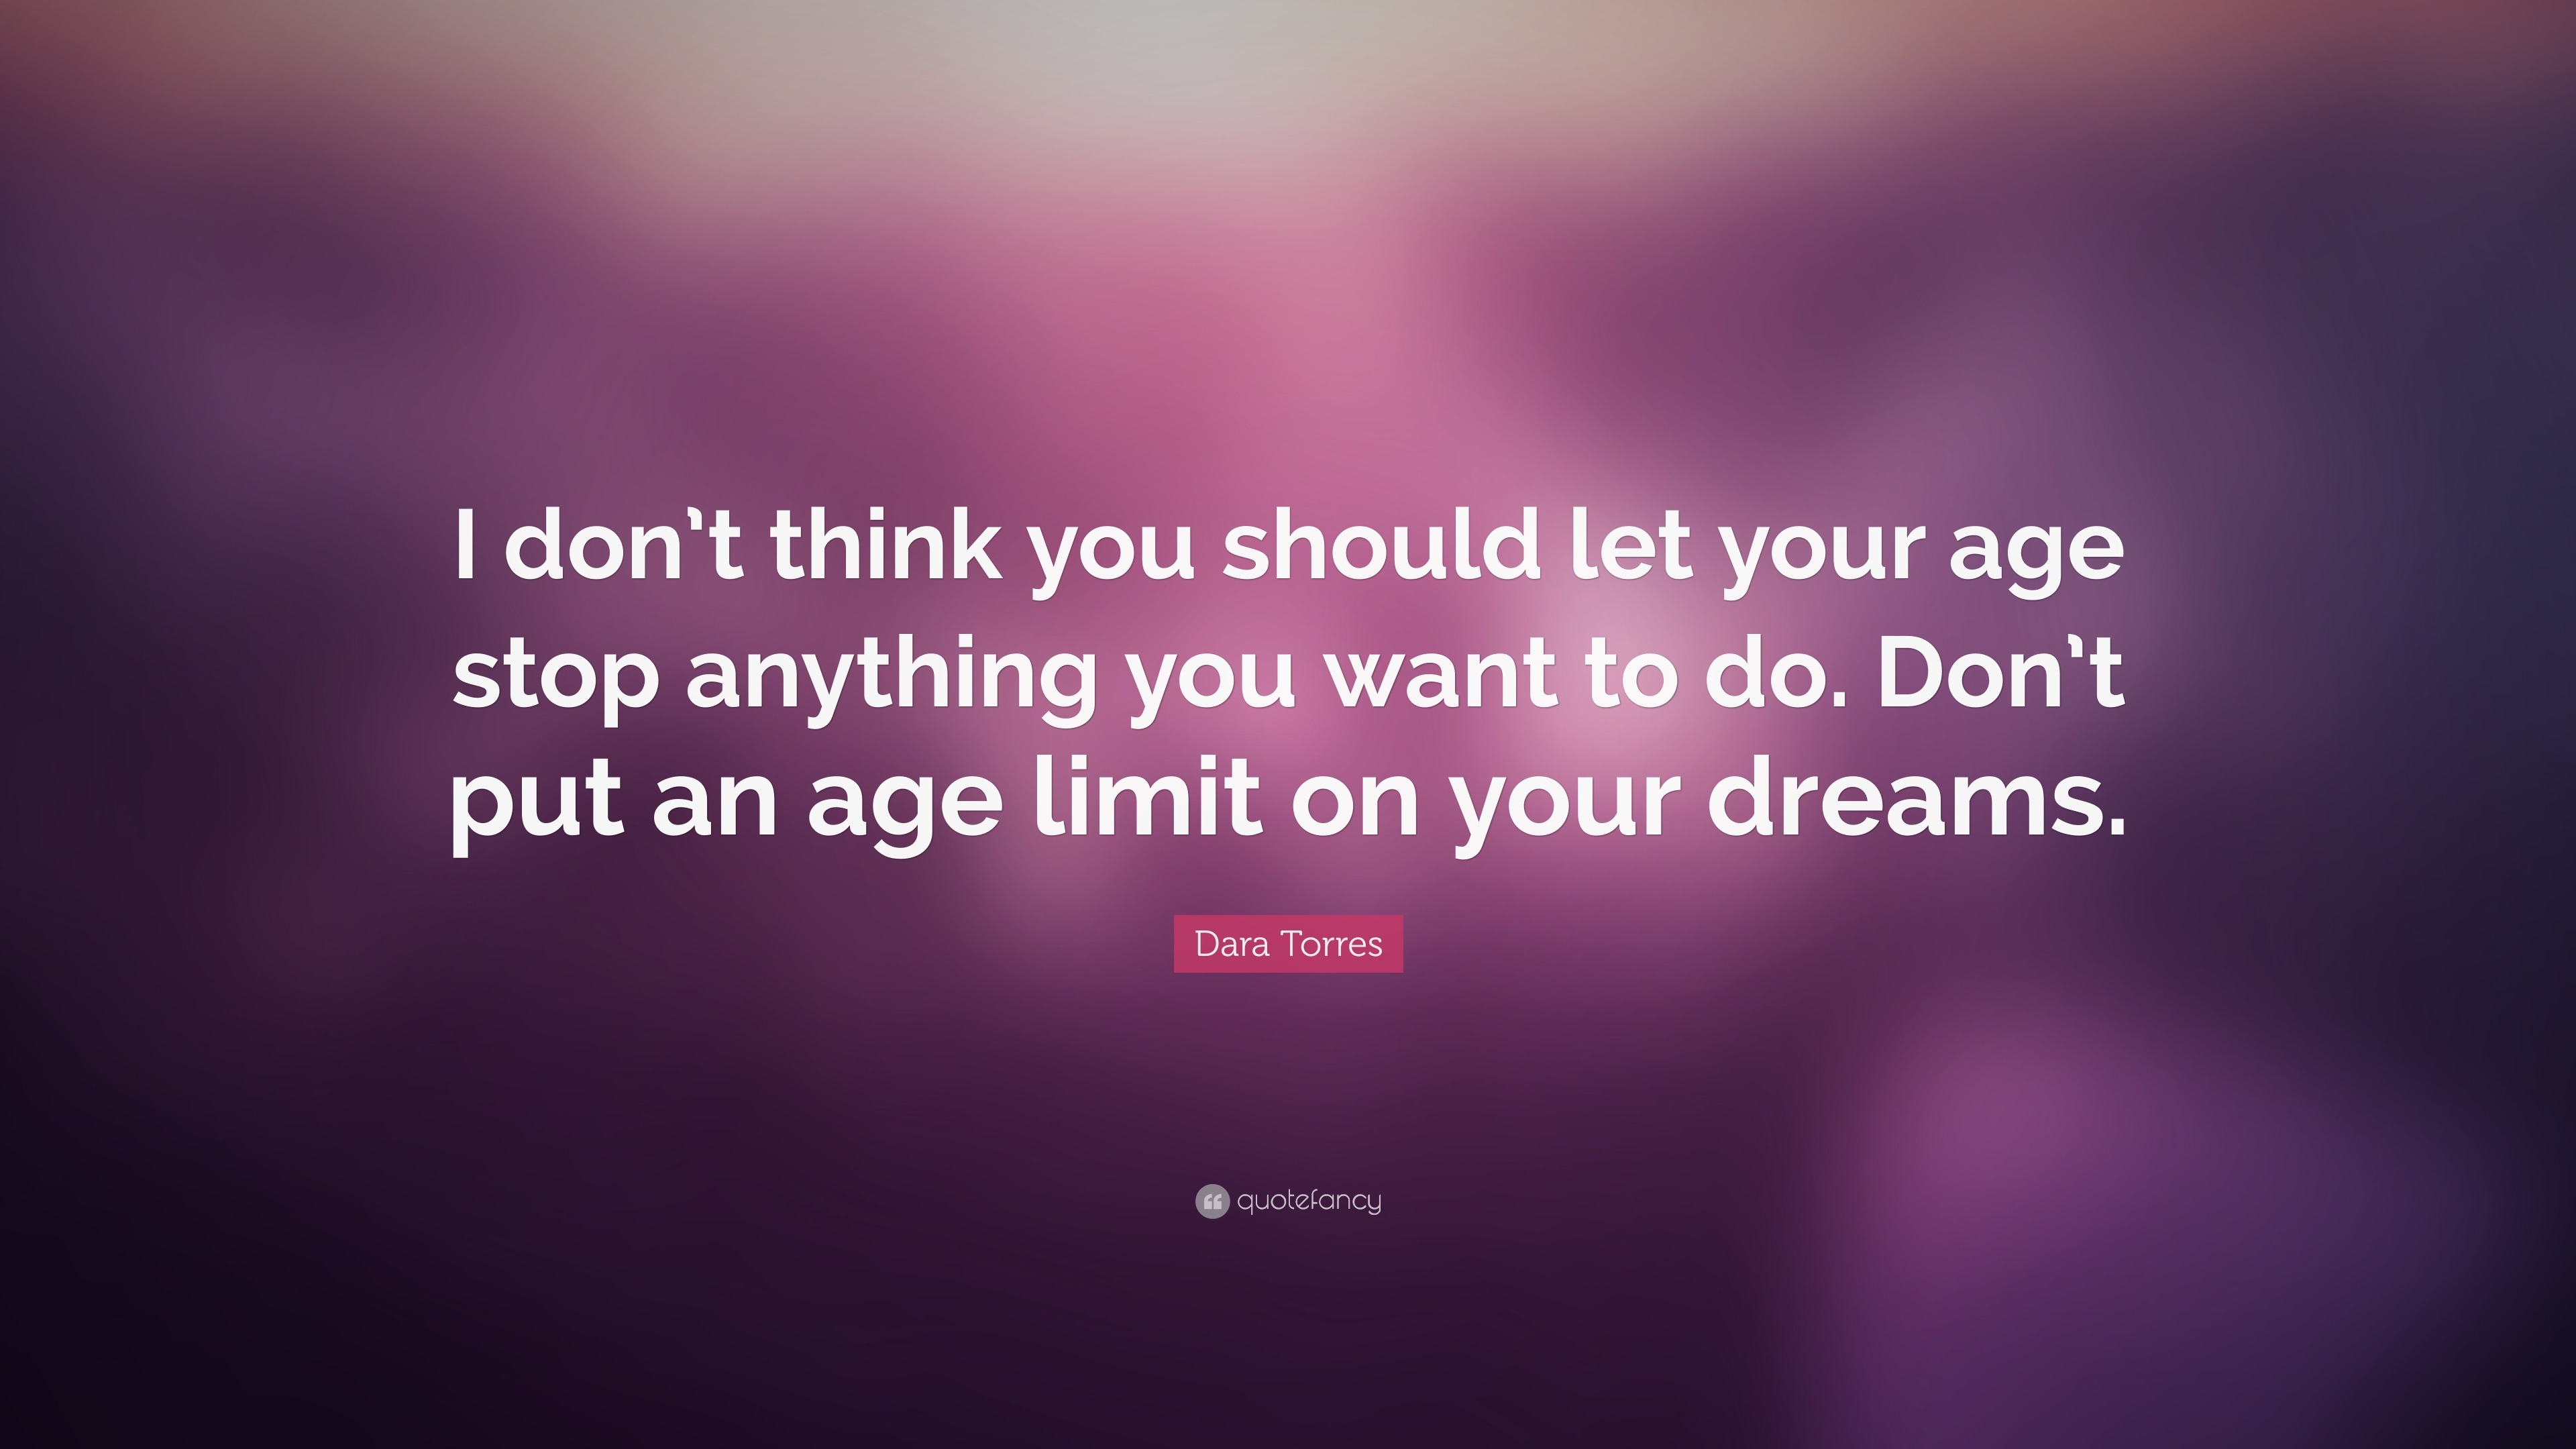 Dara Torres Quote: “I don’t think you should let your age stop anything ...